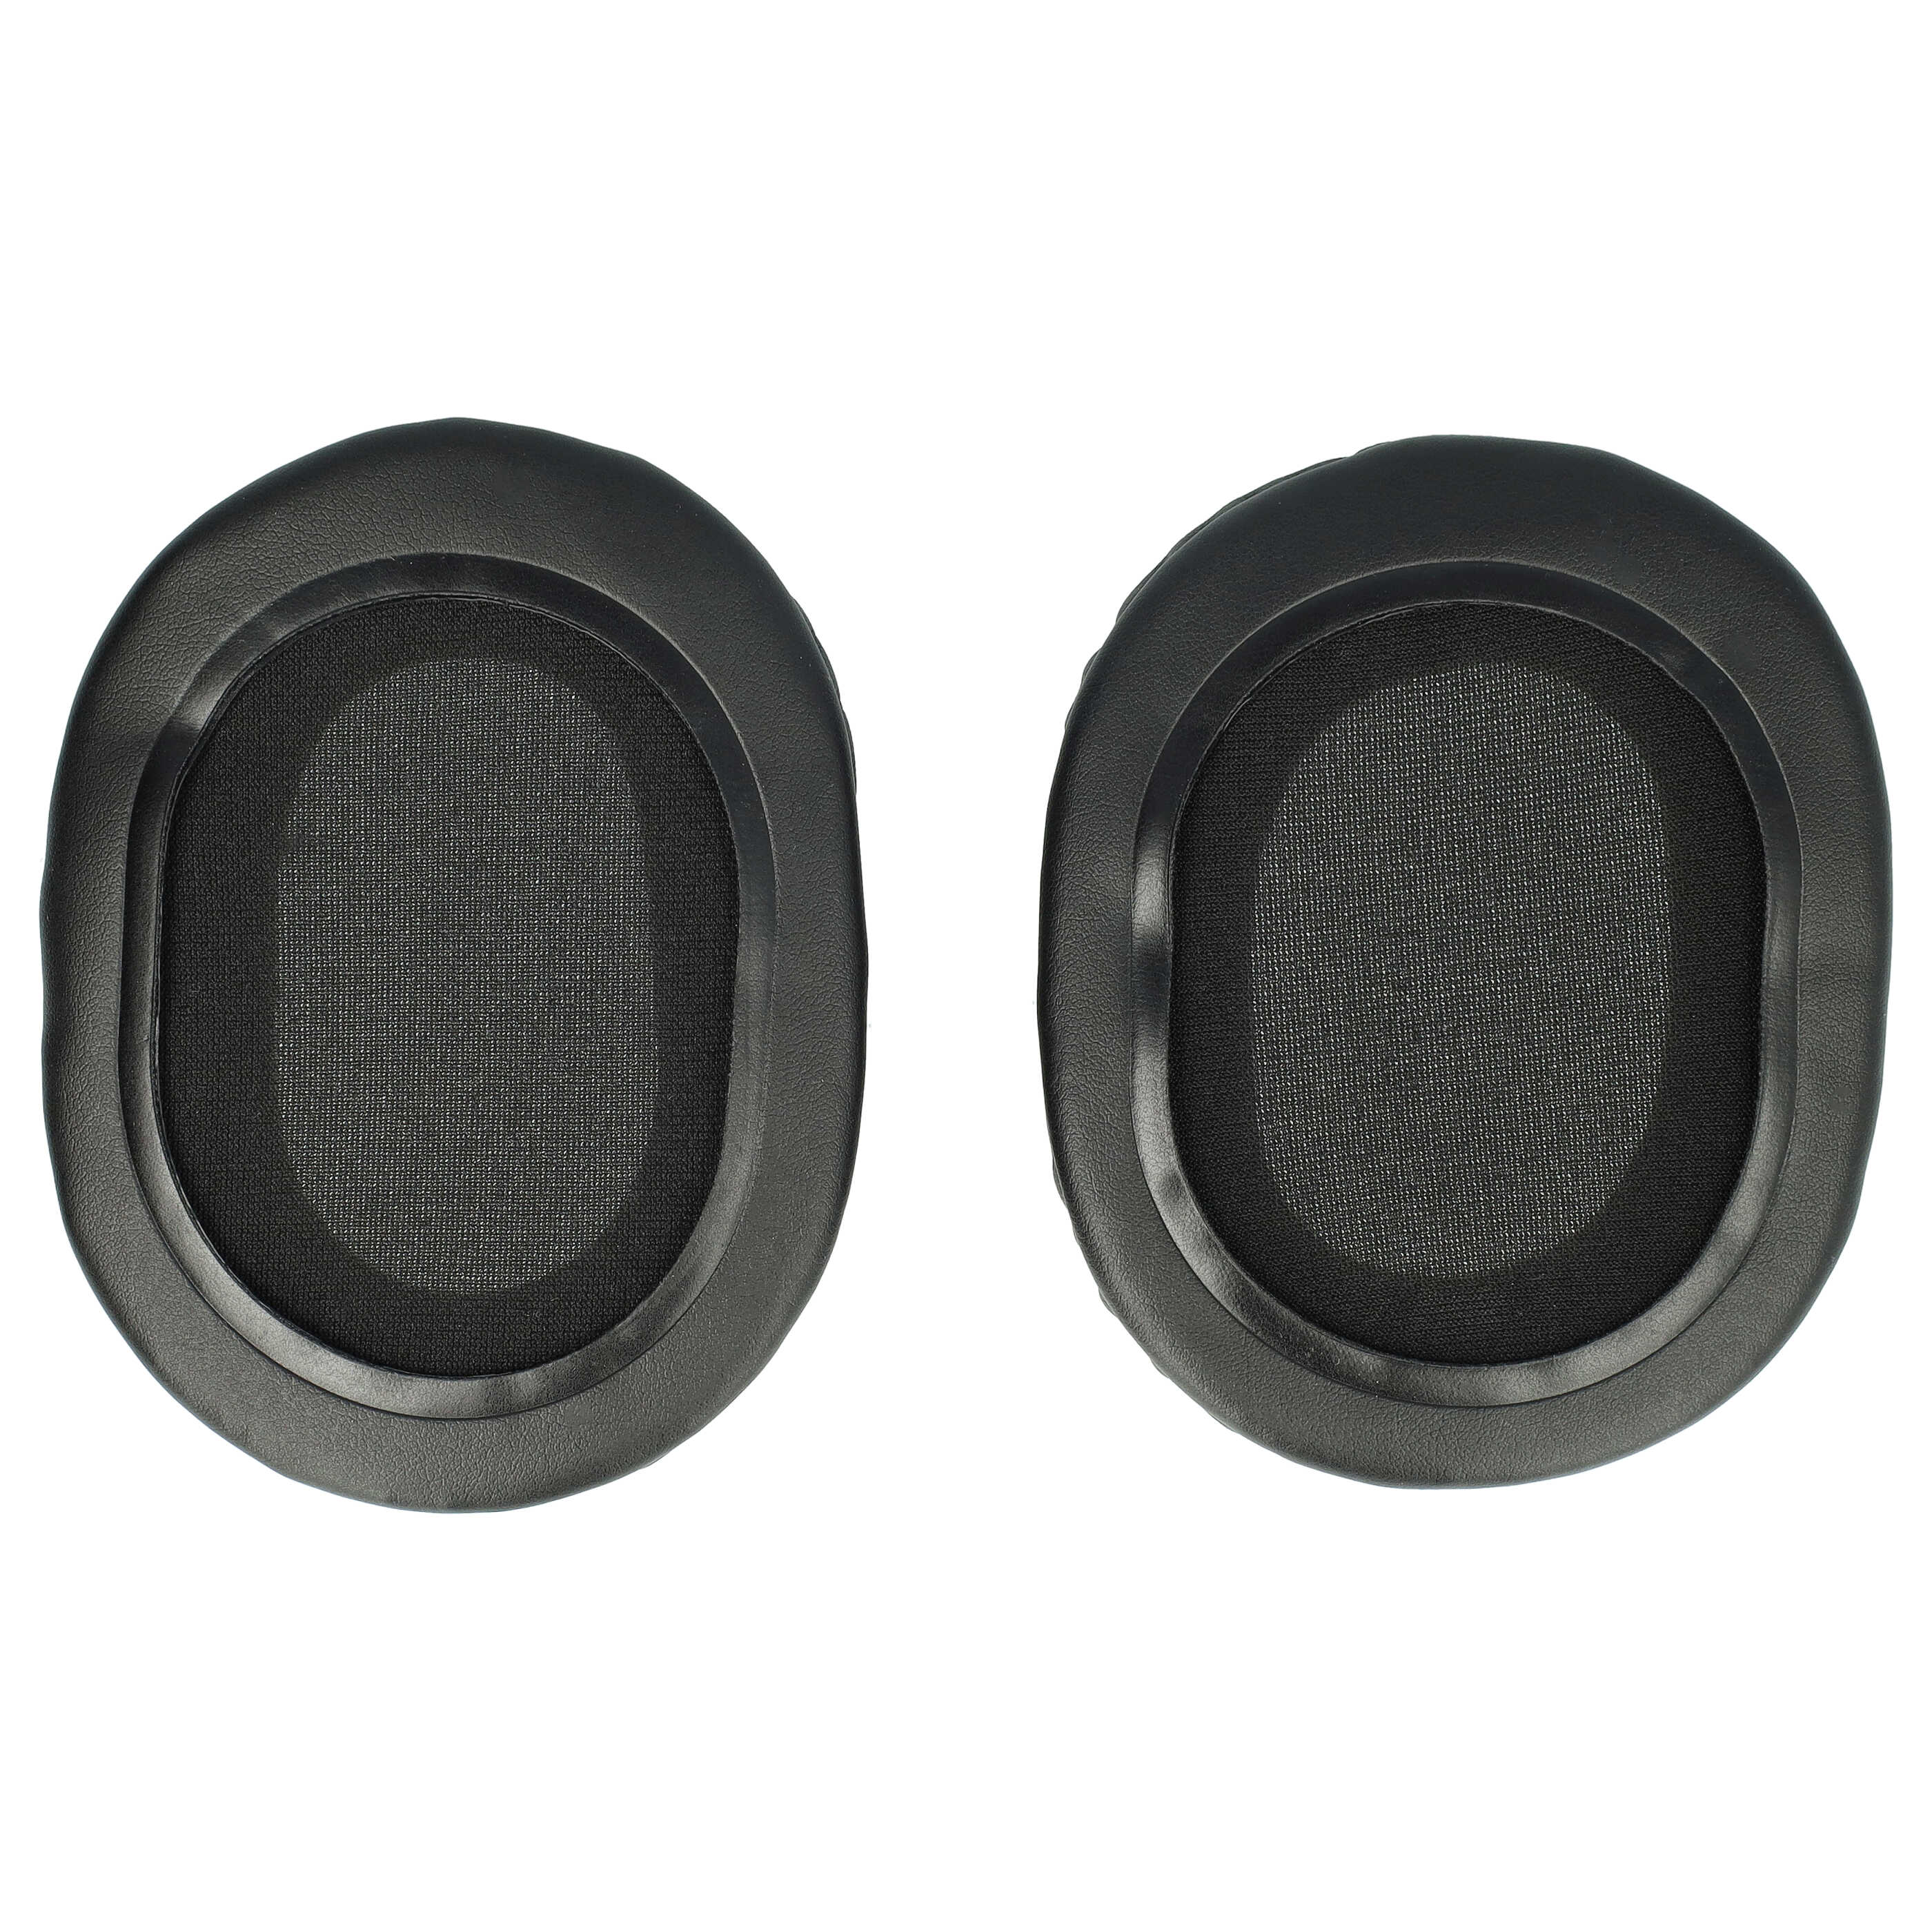 2x Ear Pads suitable for Teufel MASSIVE Headphones etc. - foam / synthetic leather, 2 mm thick